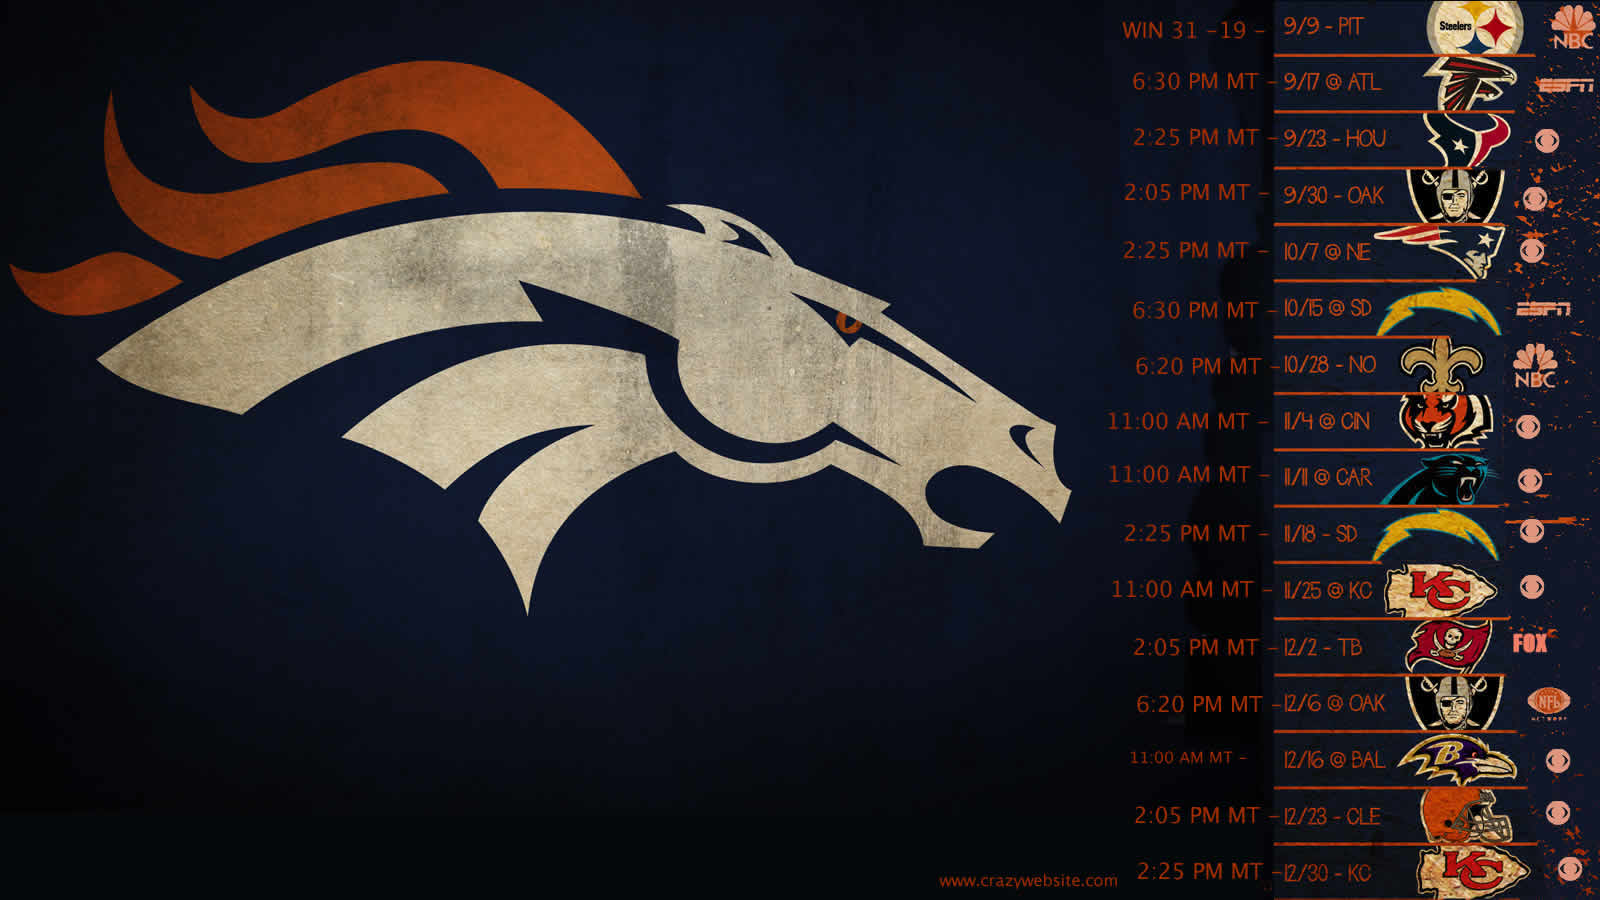  we recommend you this great picture Enjoy Denver Broncos wallpaper